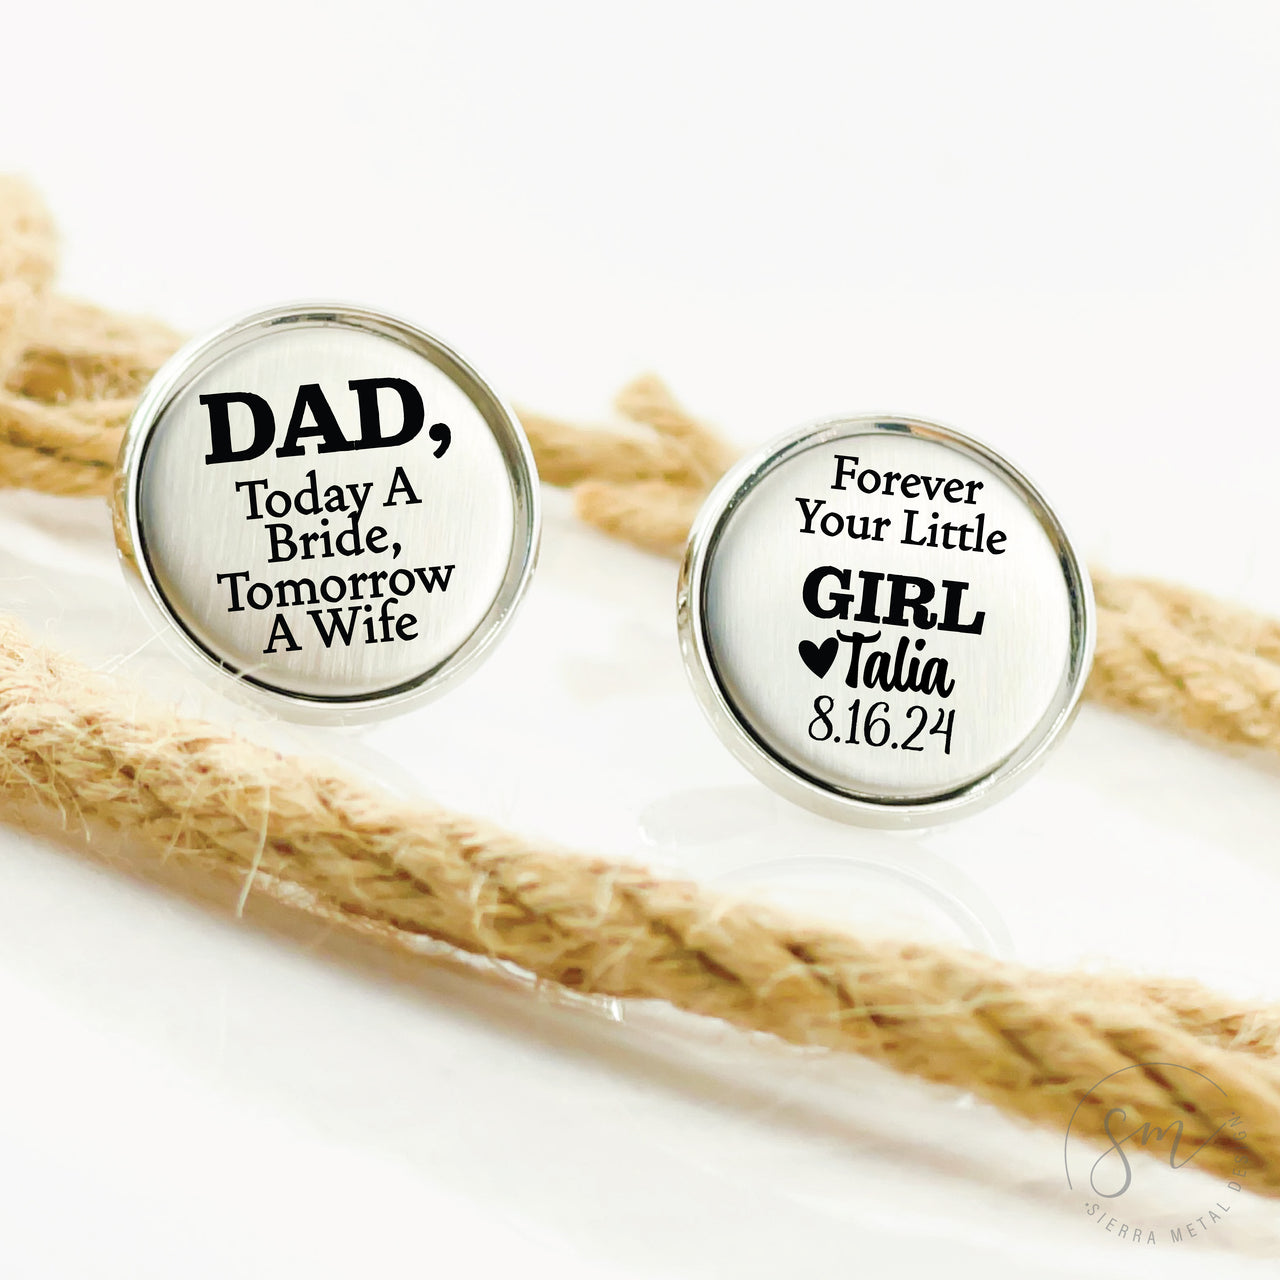 Today A Bride Tomorrow A Wife Forever Your Little Girl Cufflinks